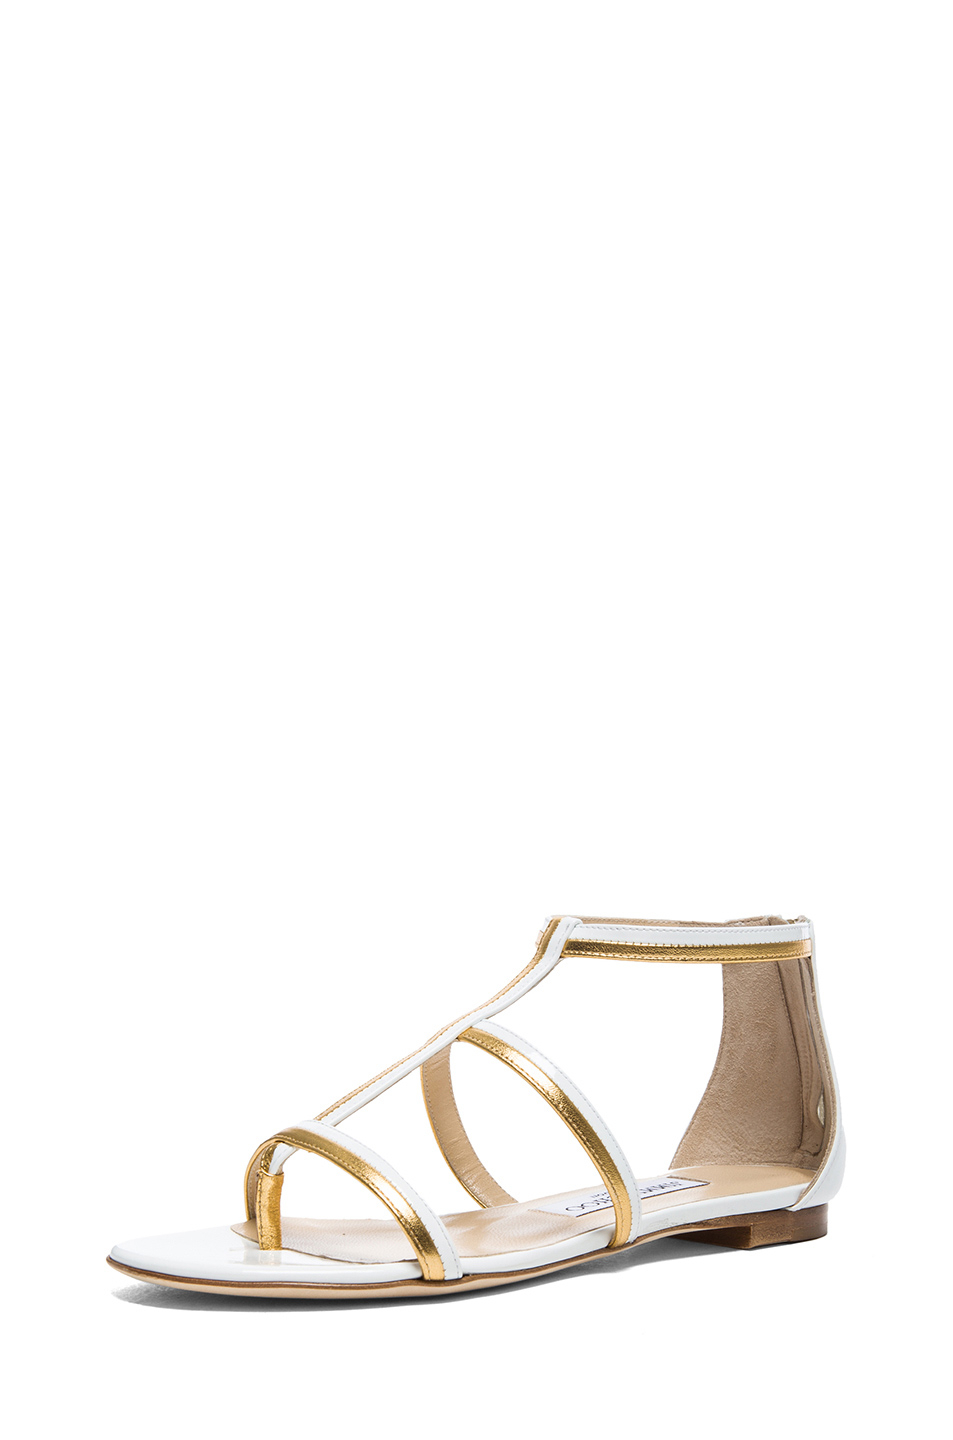 Jimmy Choo Tabitha Patent Leather Sandals in White (White & Gold) | Lyst